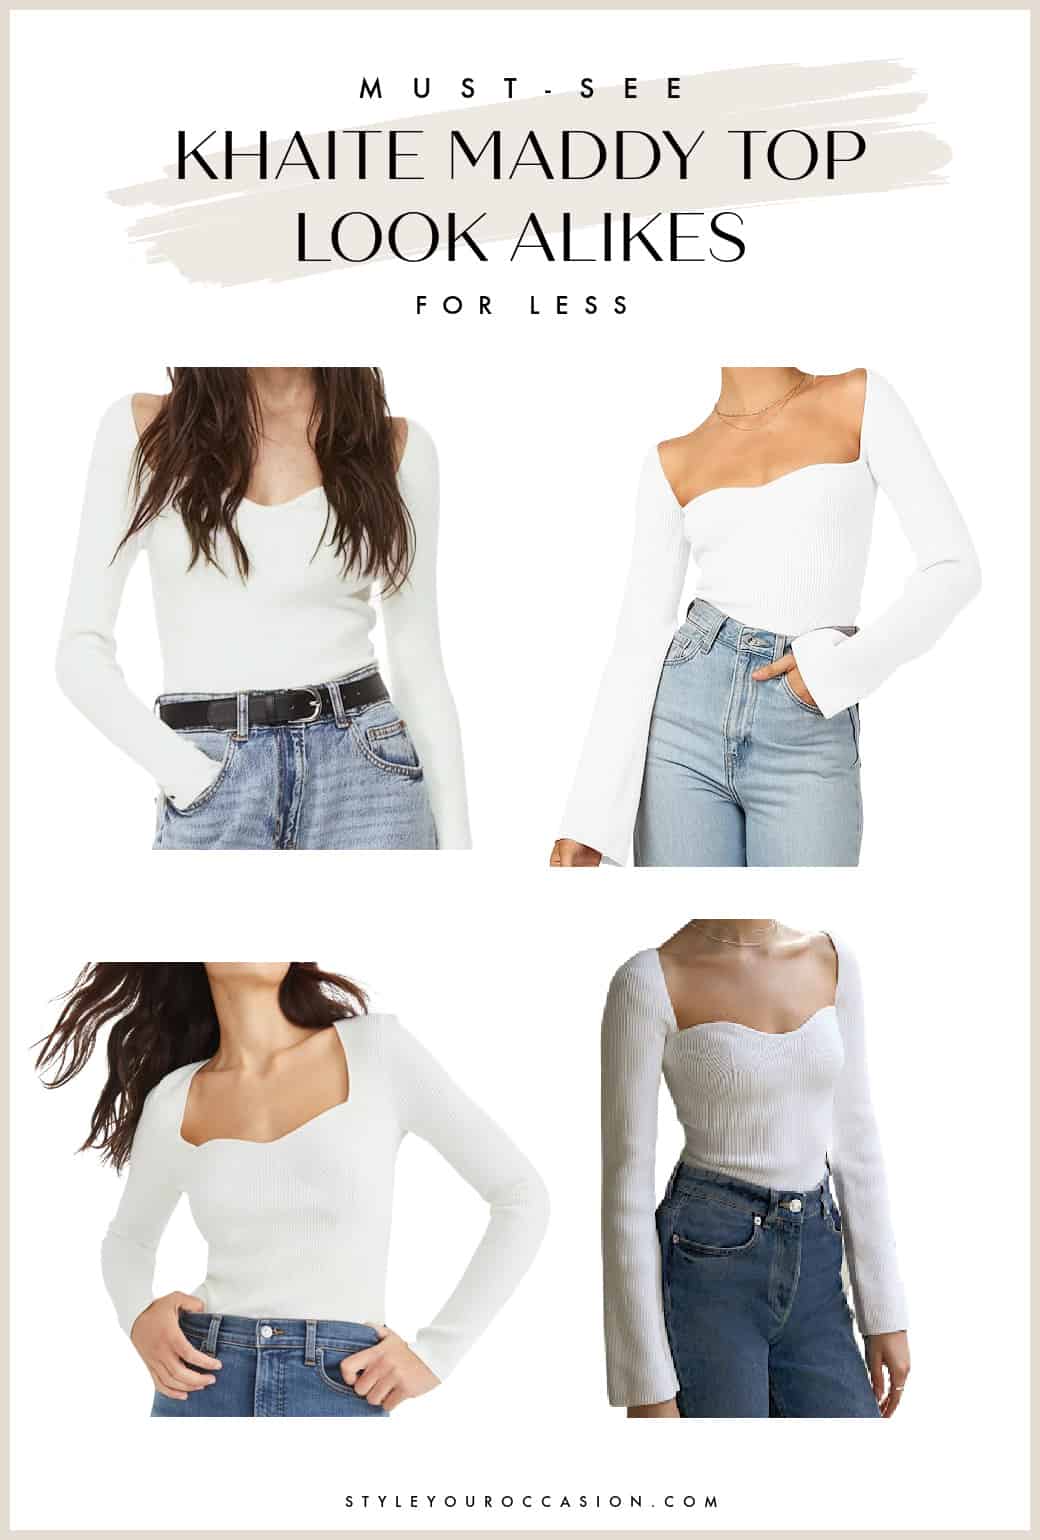 Pinterest collage of four white knit tops that look like the Khaite Maddy top for less